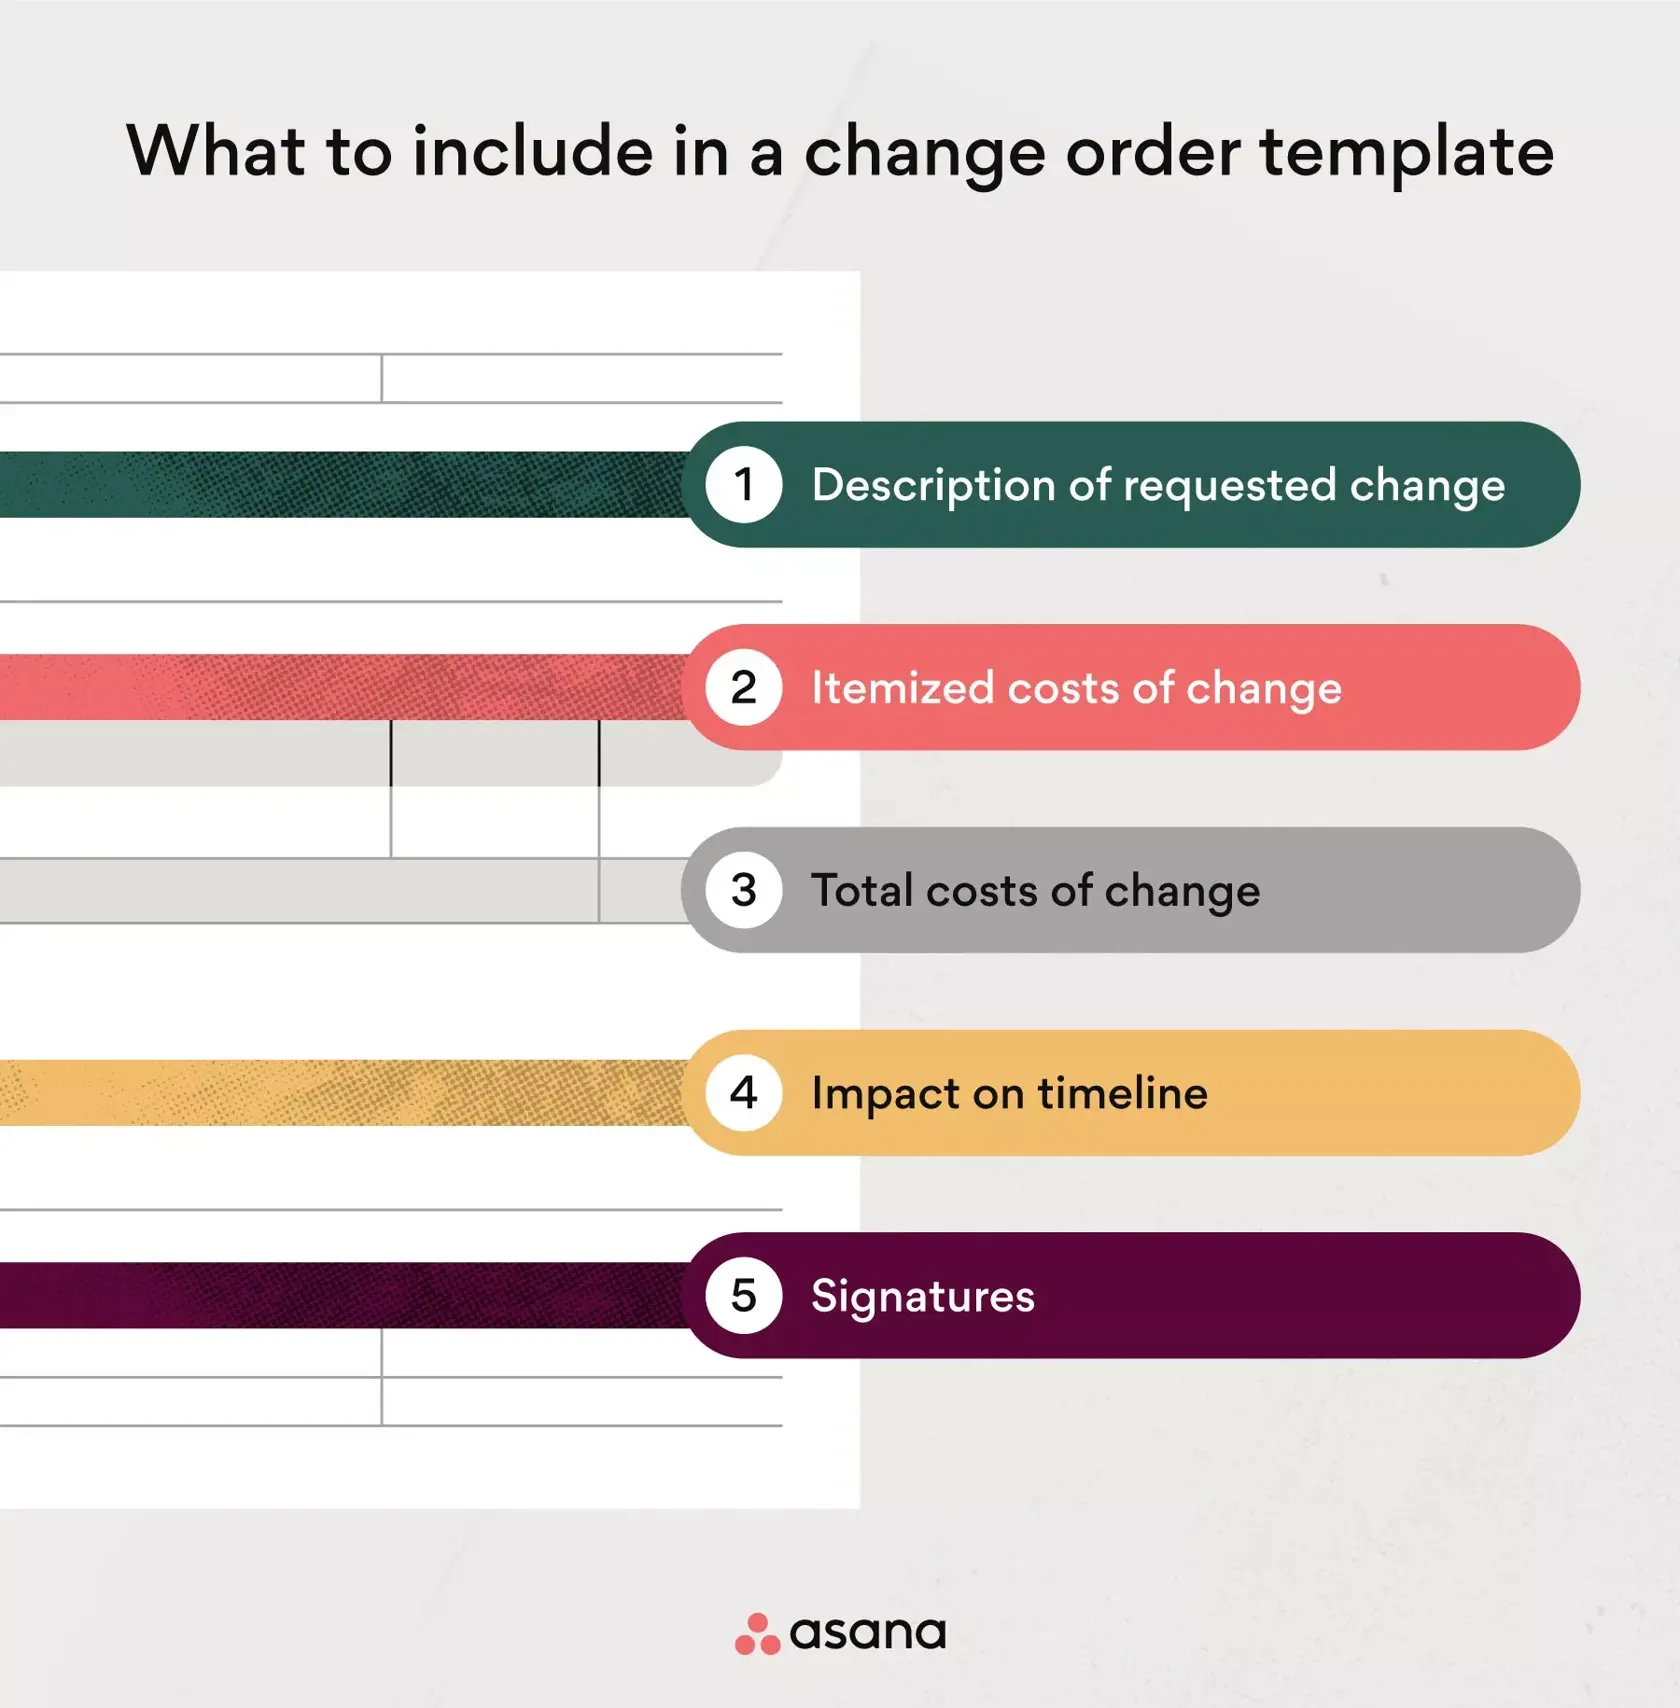 [inline illustration] What to include in a change order template (infographic)